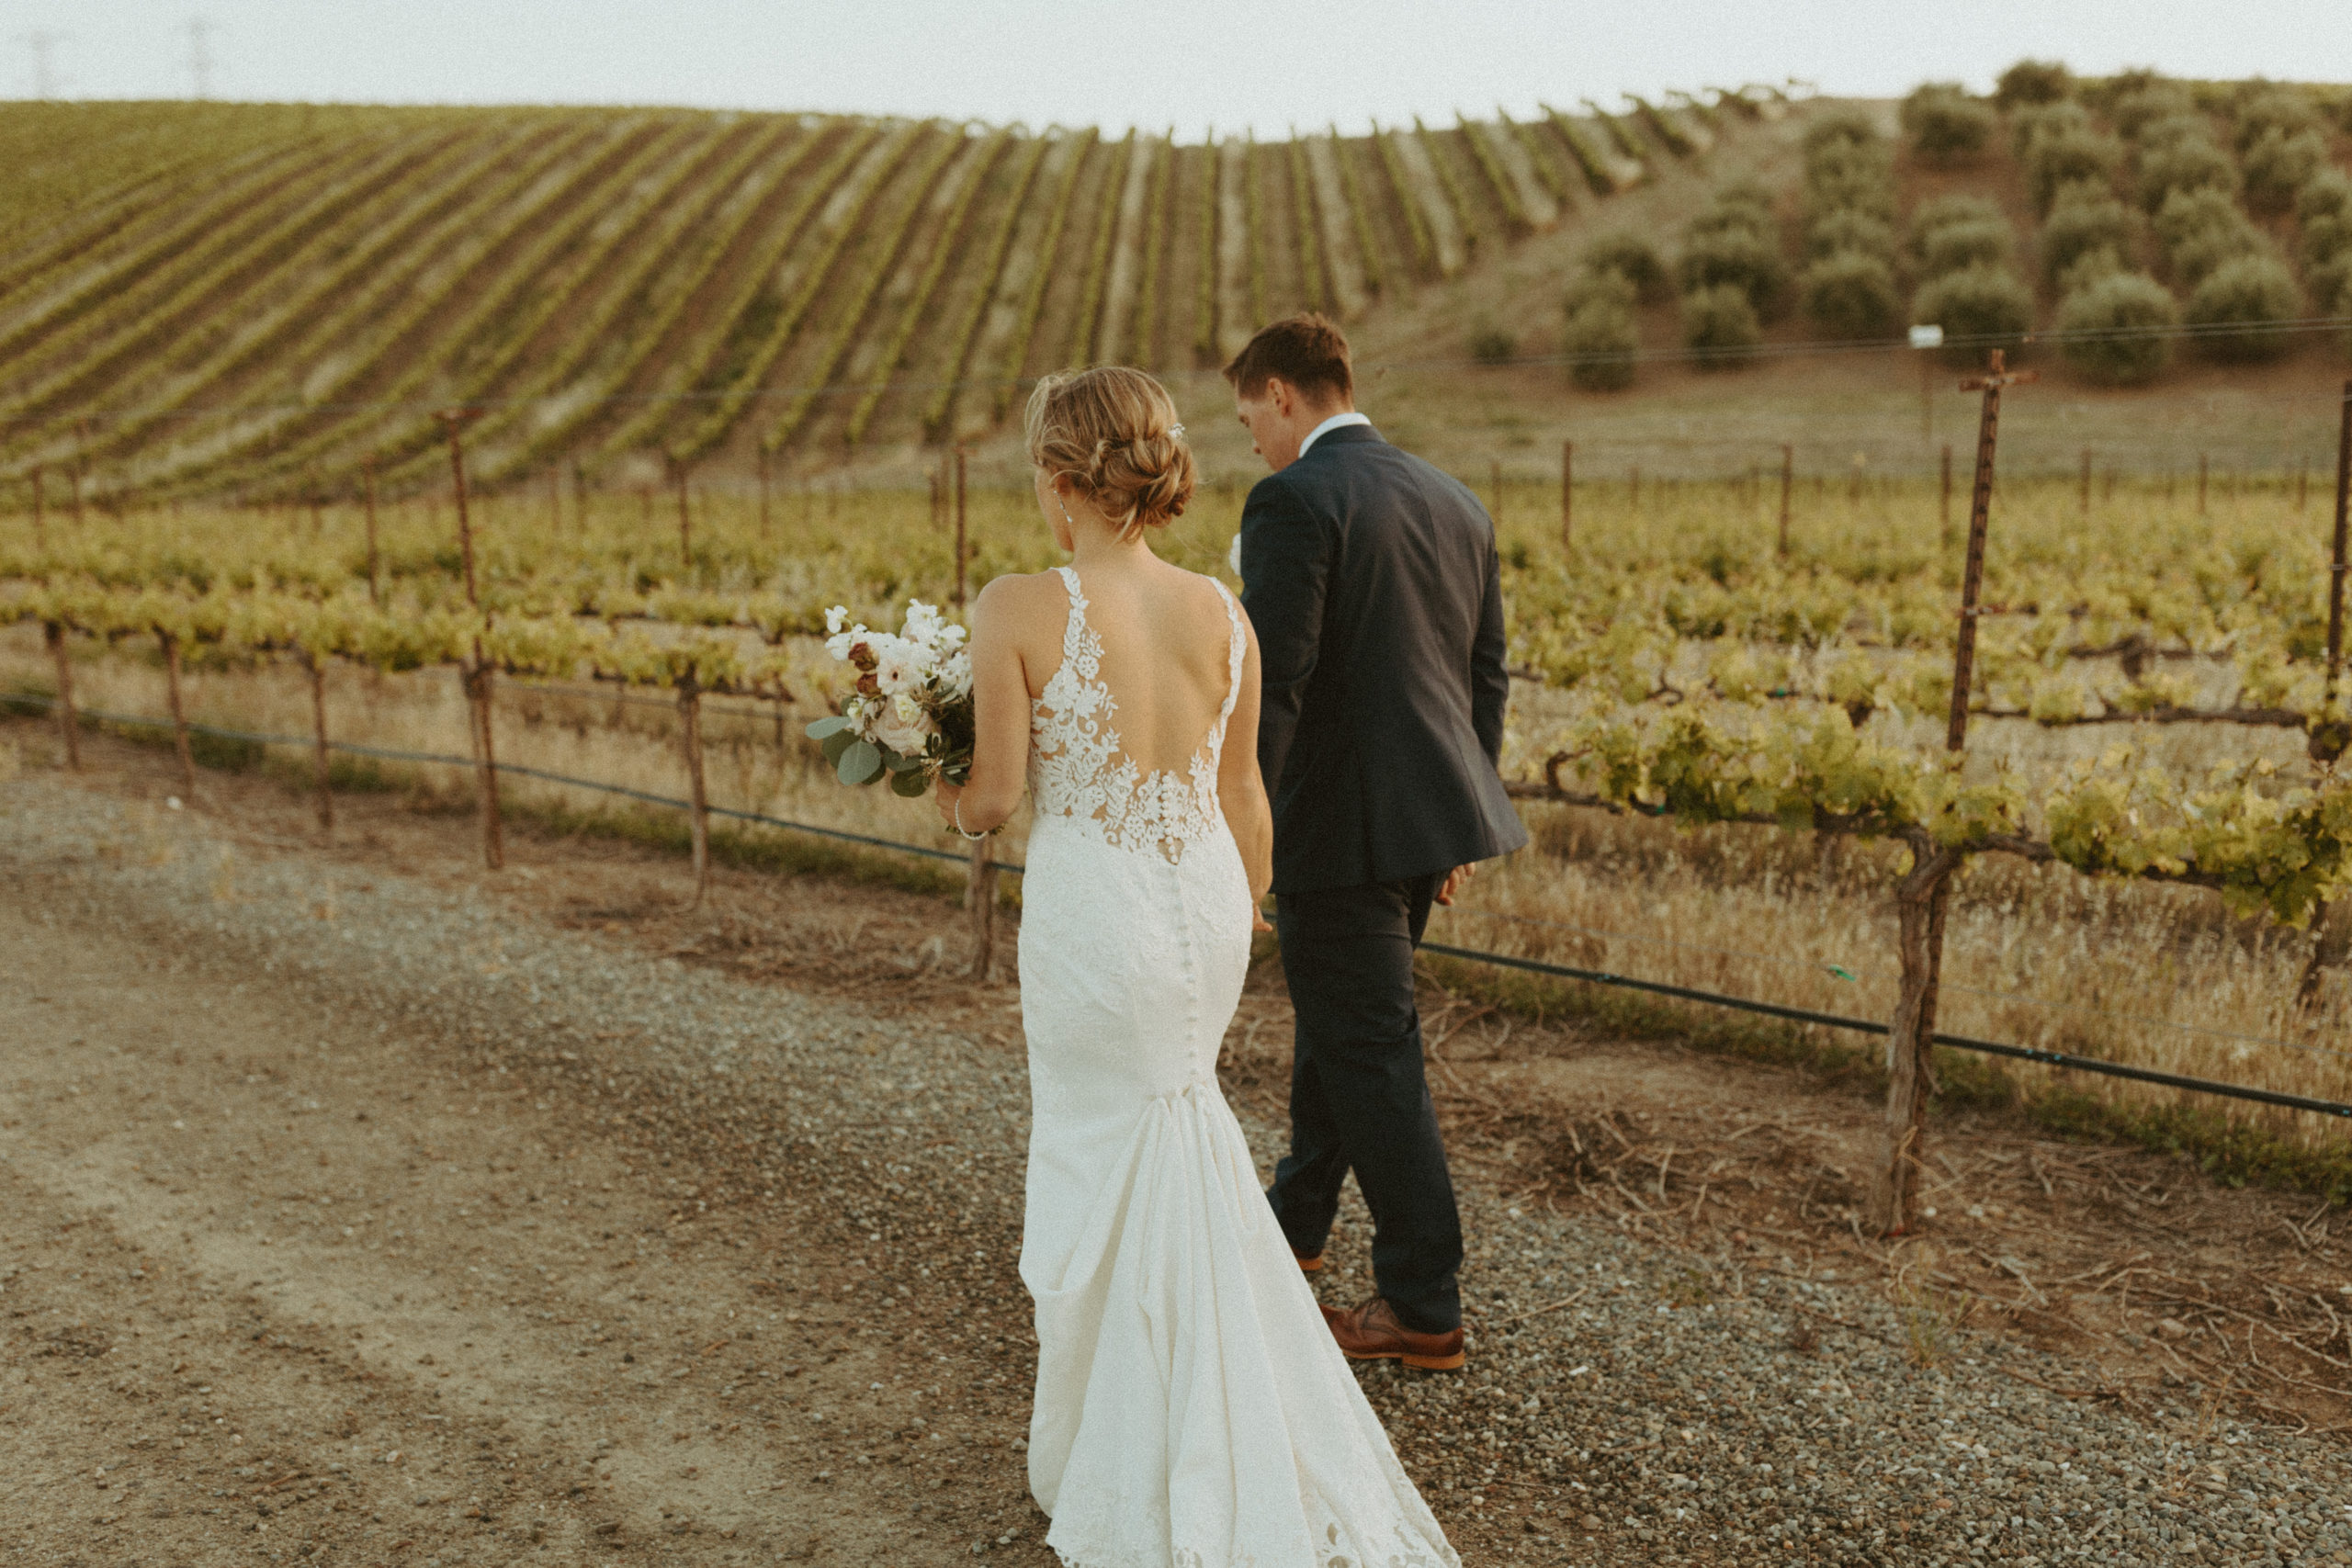 the couple walking along the side of the vineyard in California